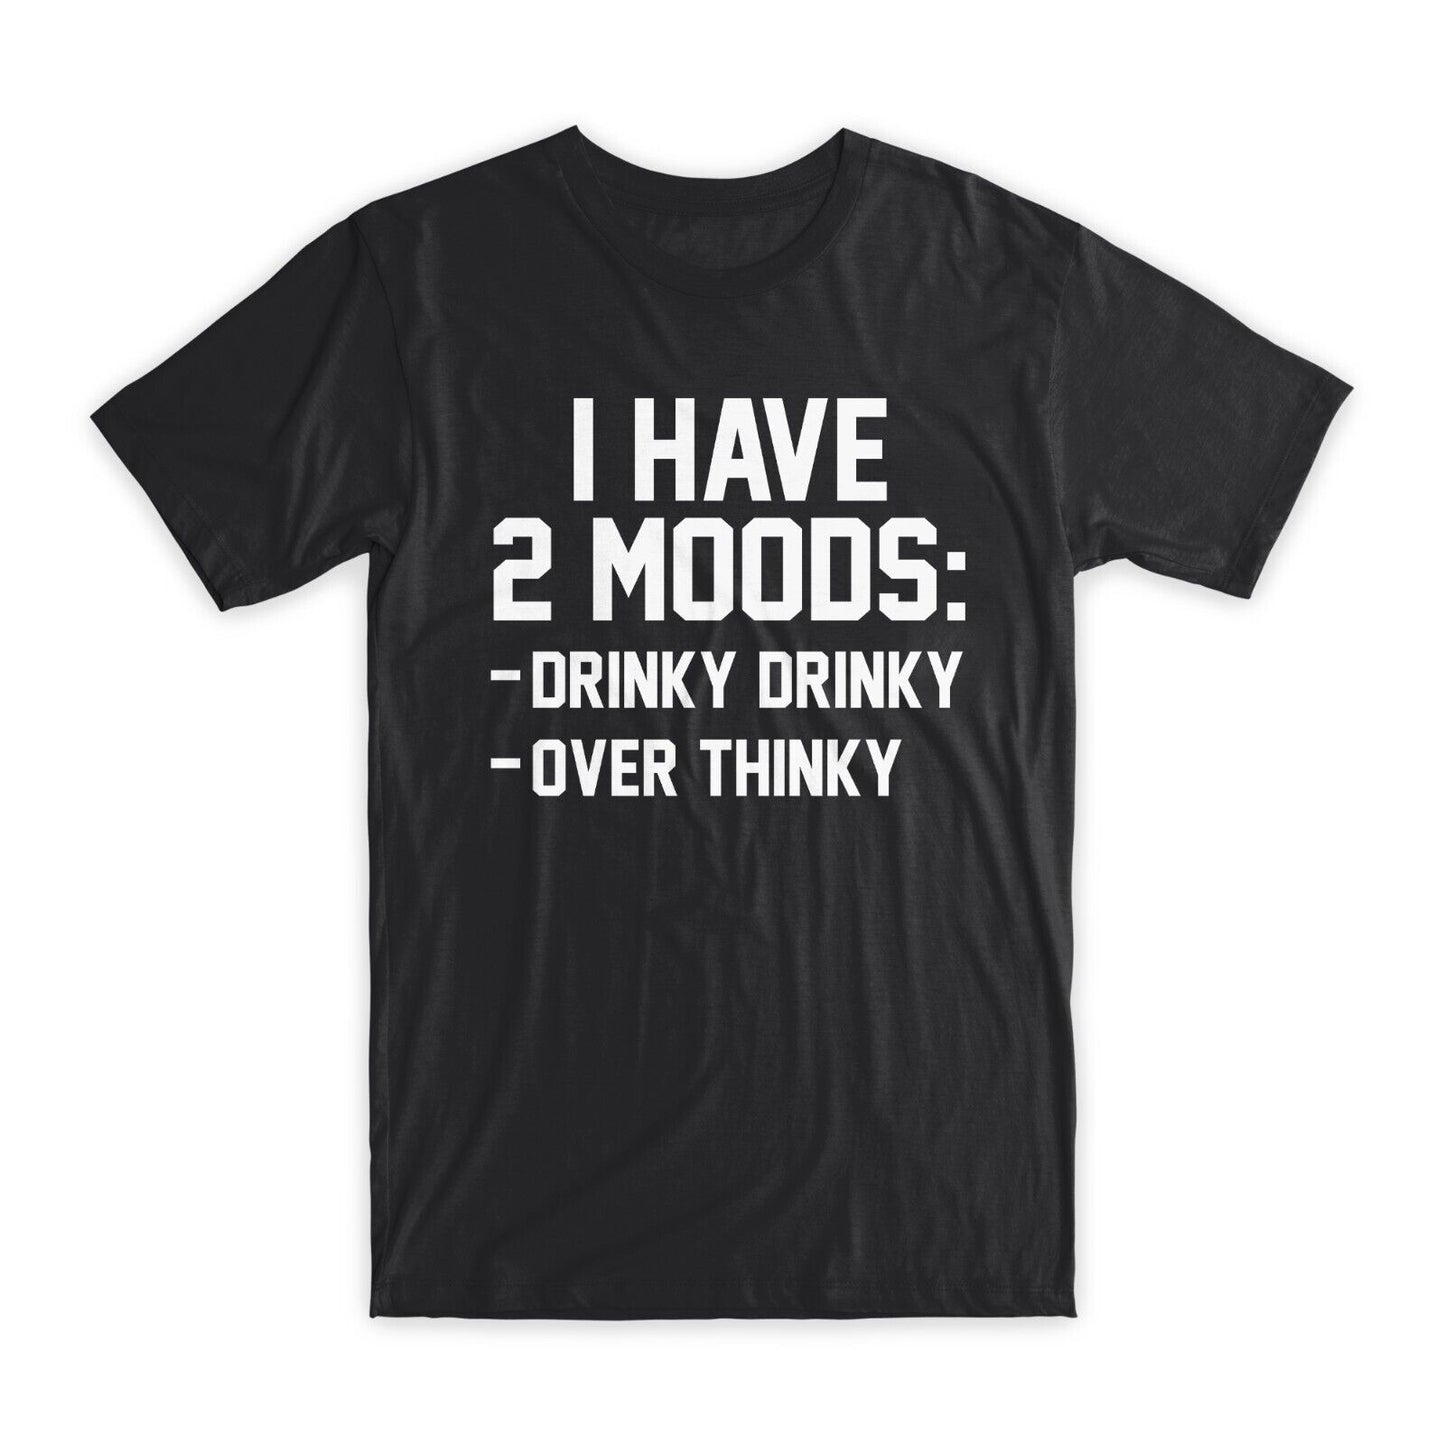 I Have 2 Moods T-Shirt Premium Soft Cotton Crew Neck Funny Tees Novelty Gift NEW